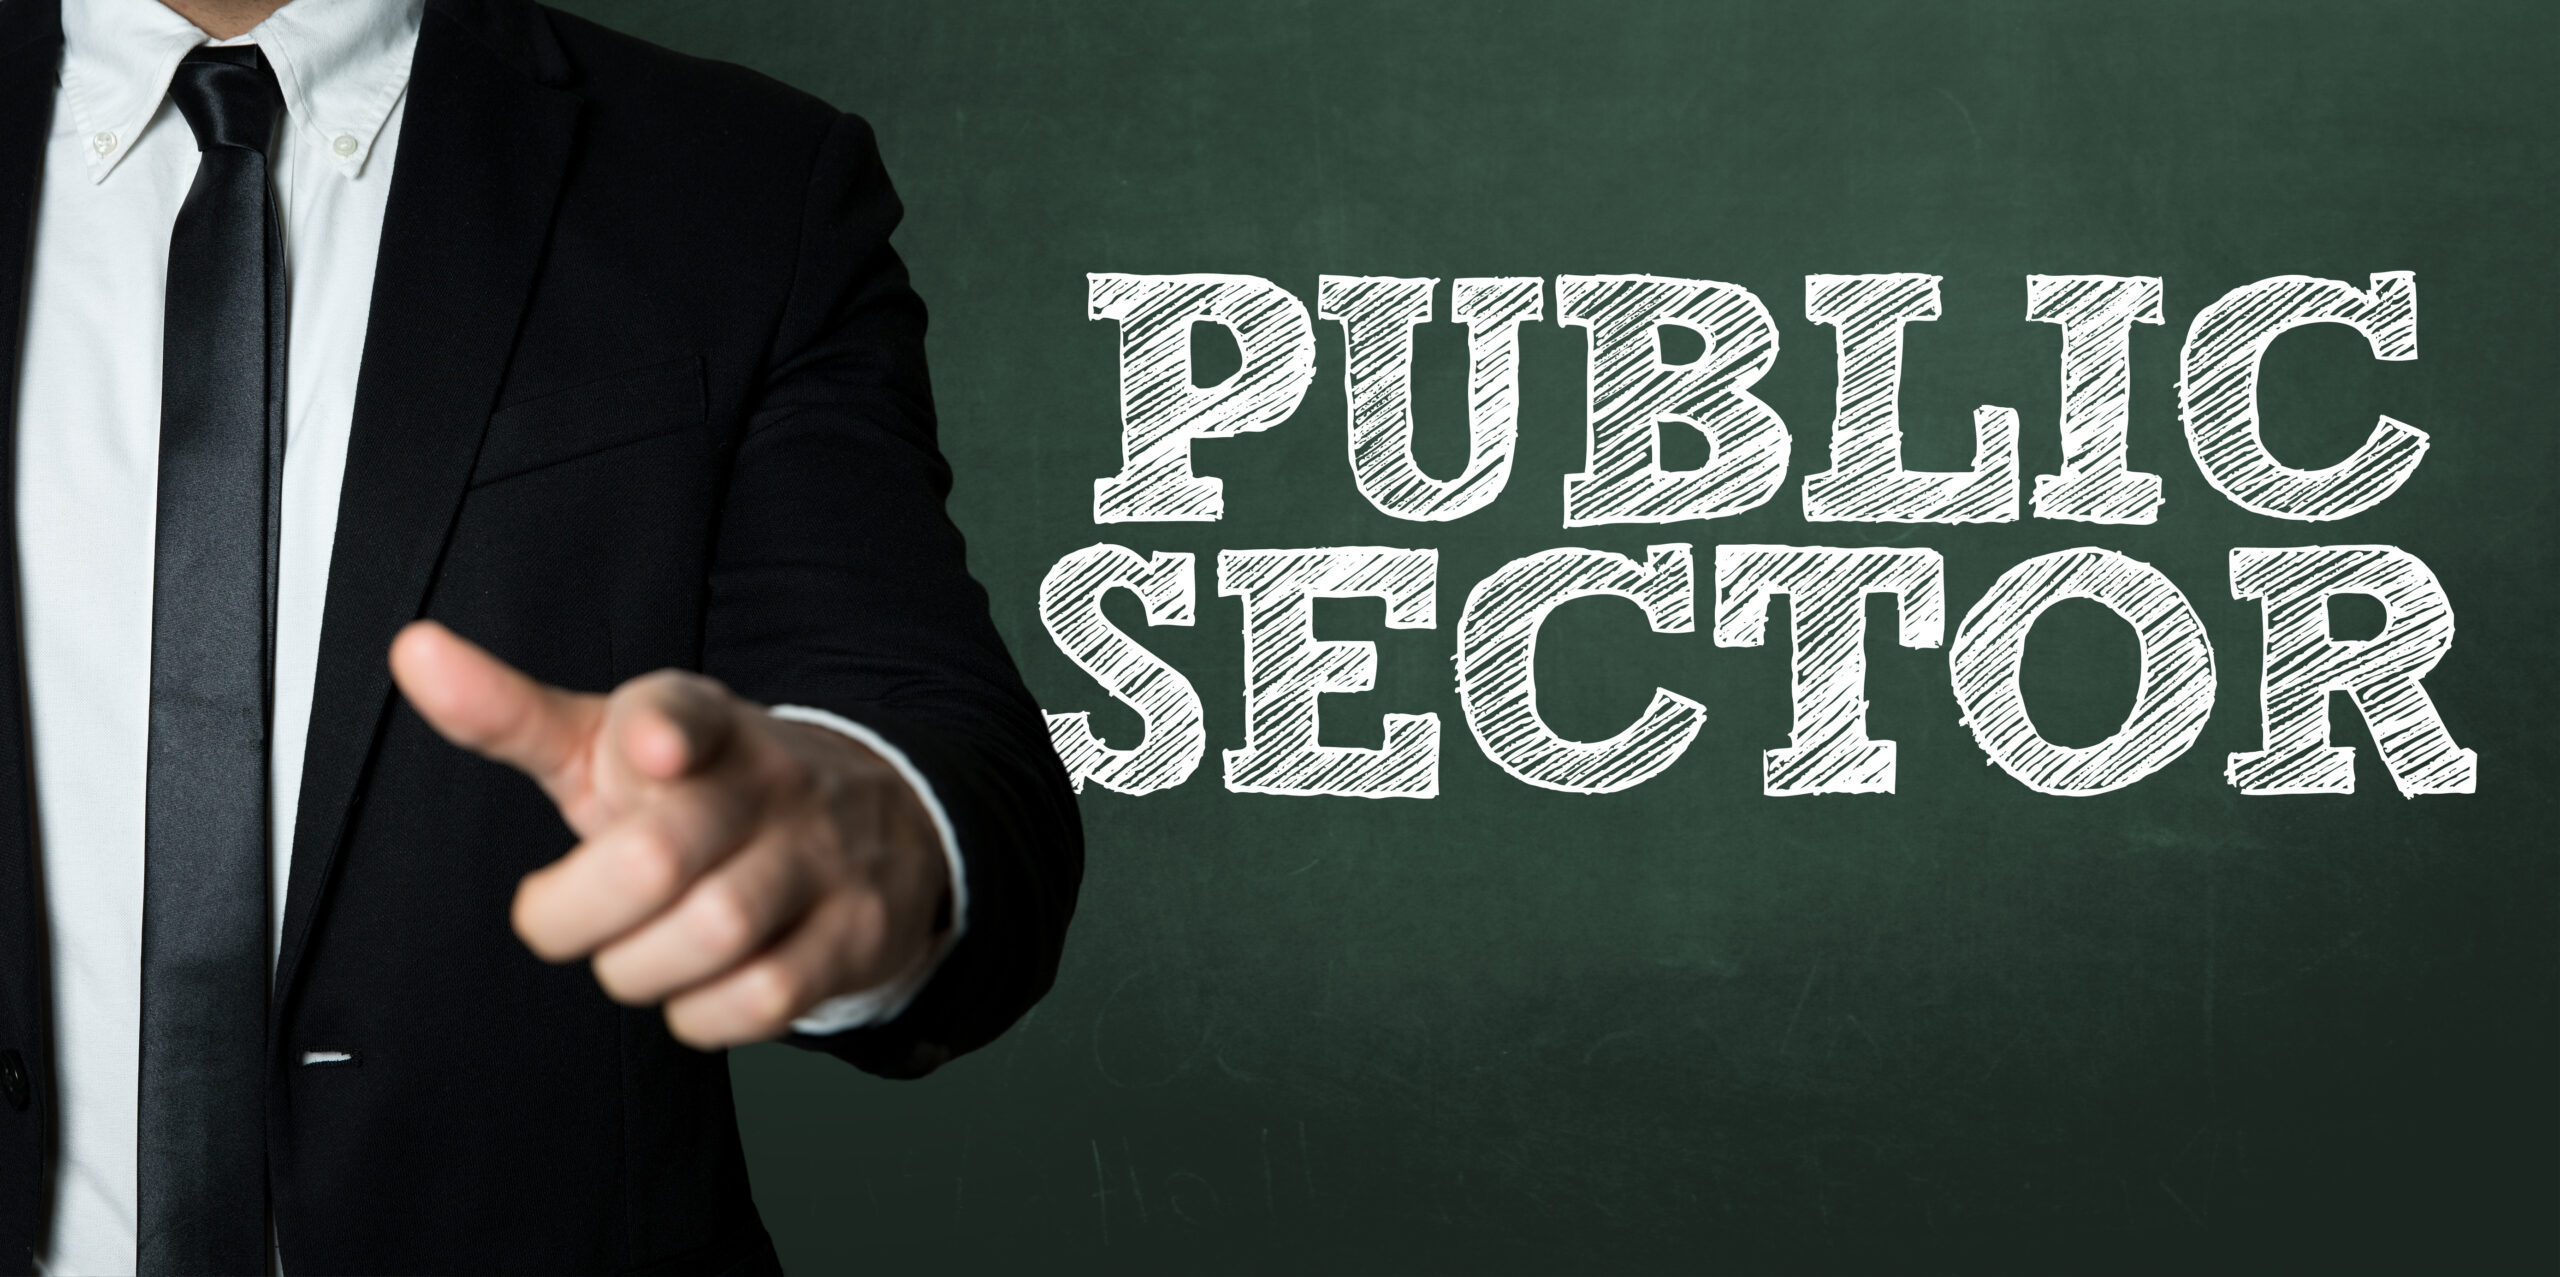 The week: public sector.